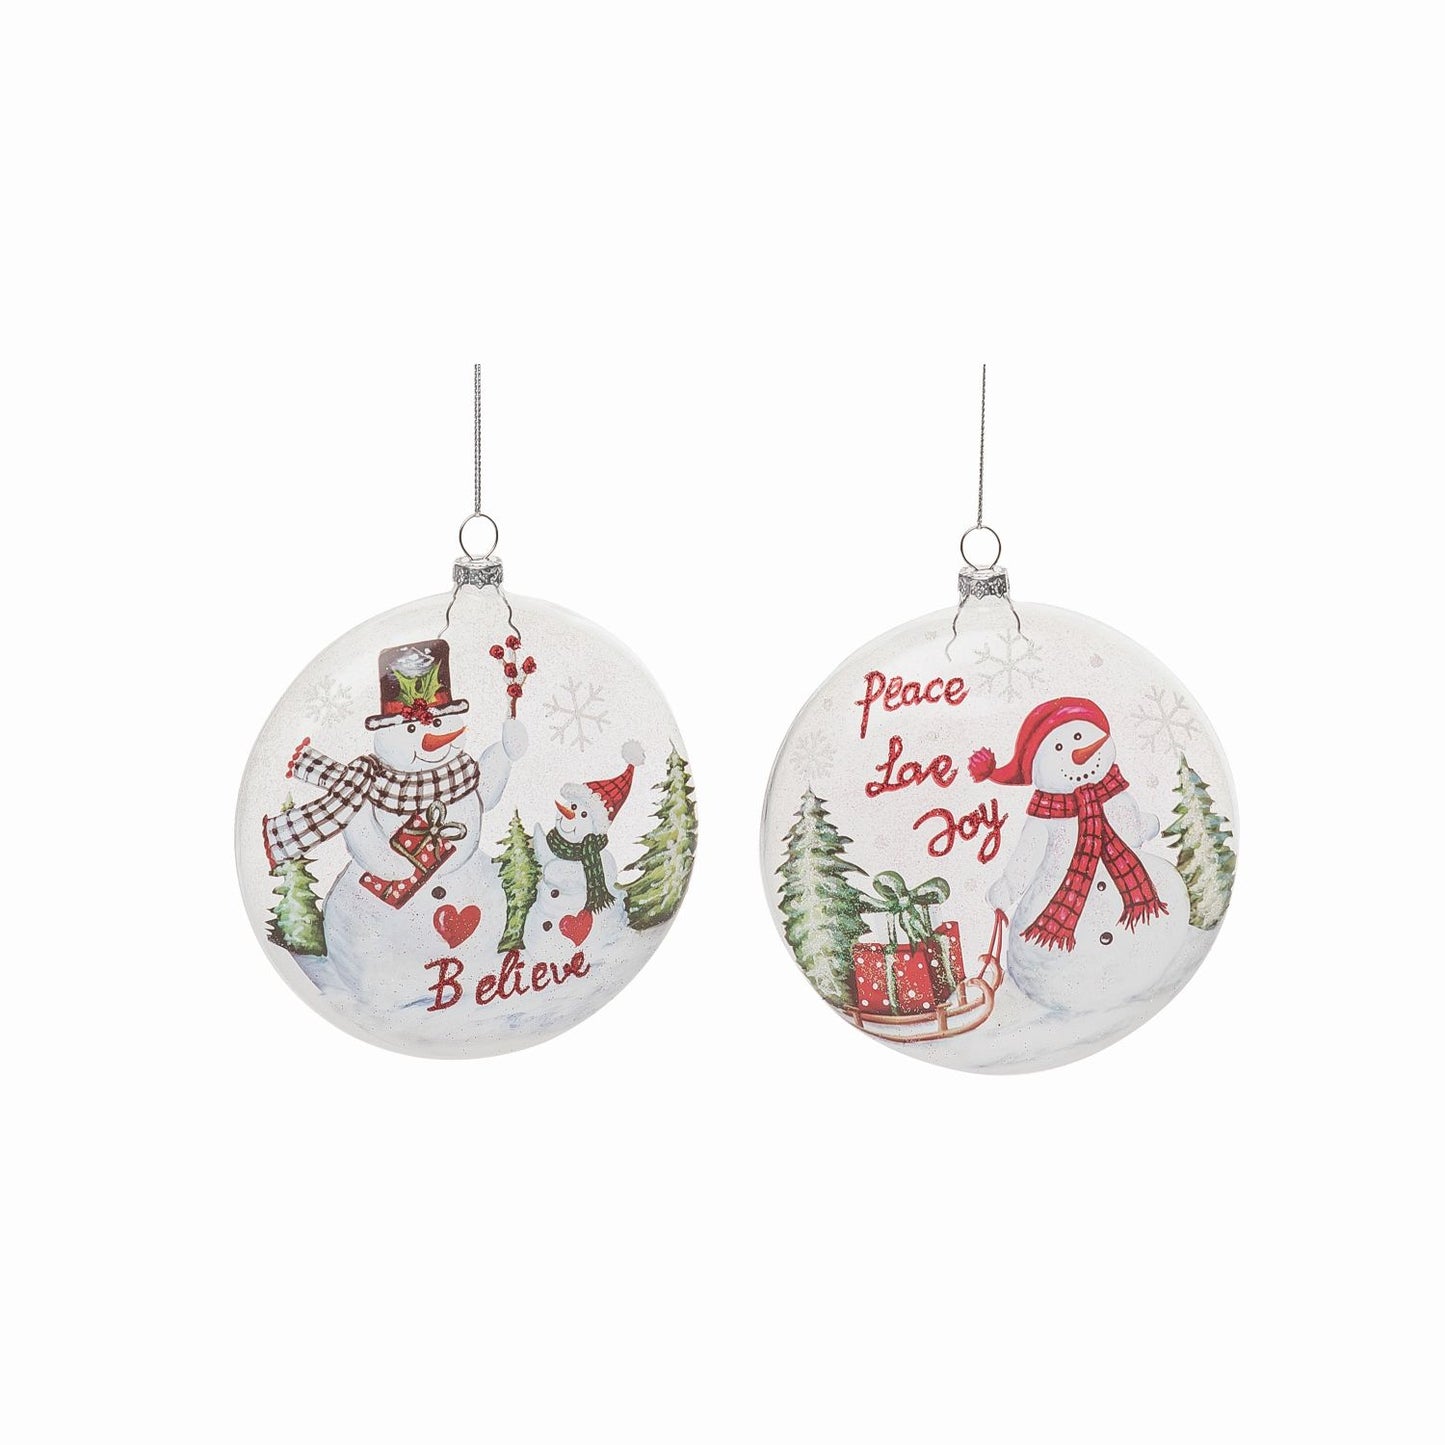 Transpac Glass Painted Snowman With Friends Ornament, Set Of 2, Assortment